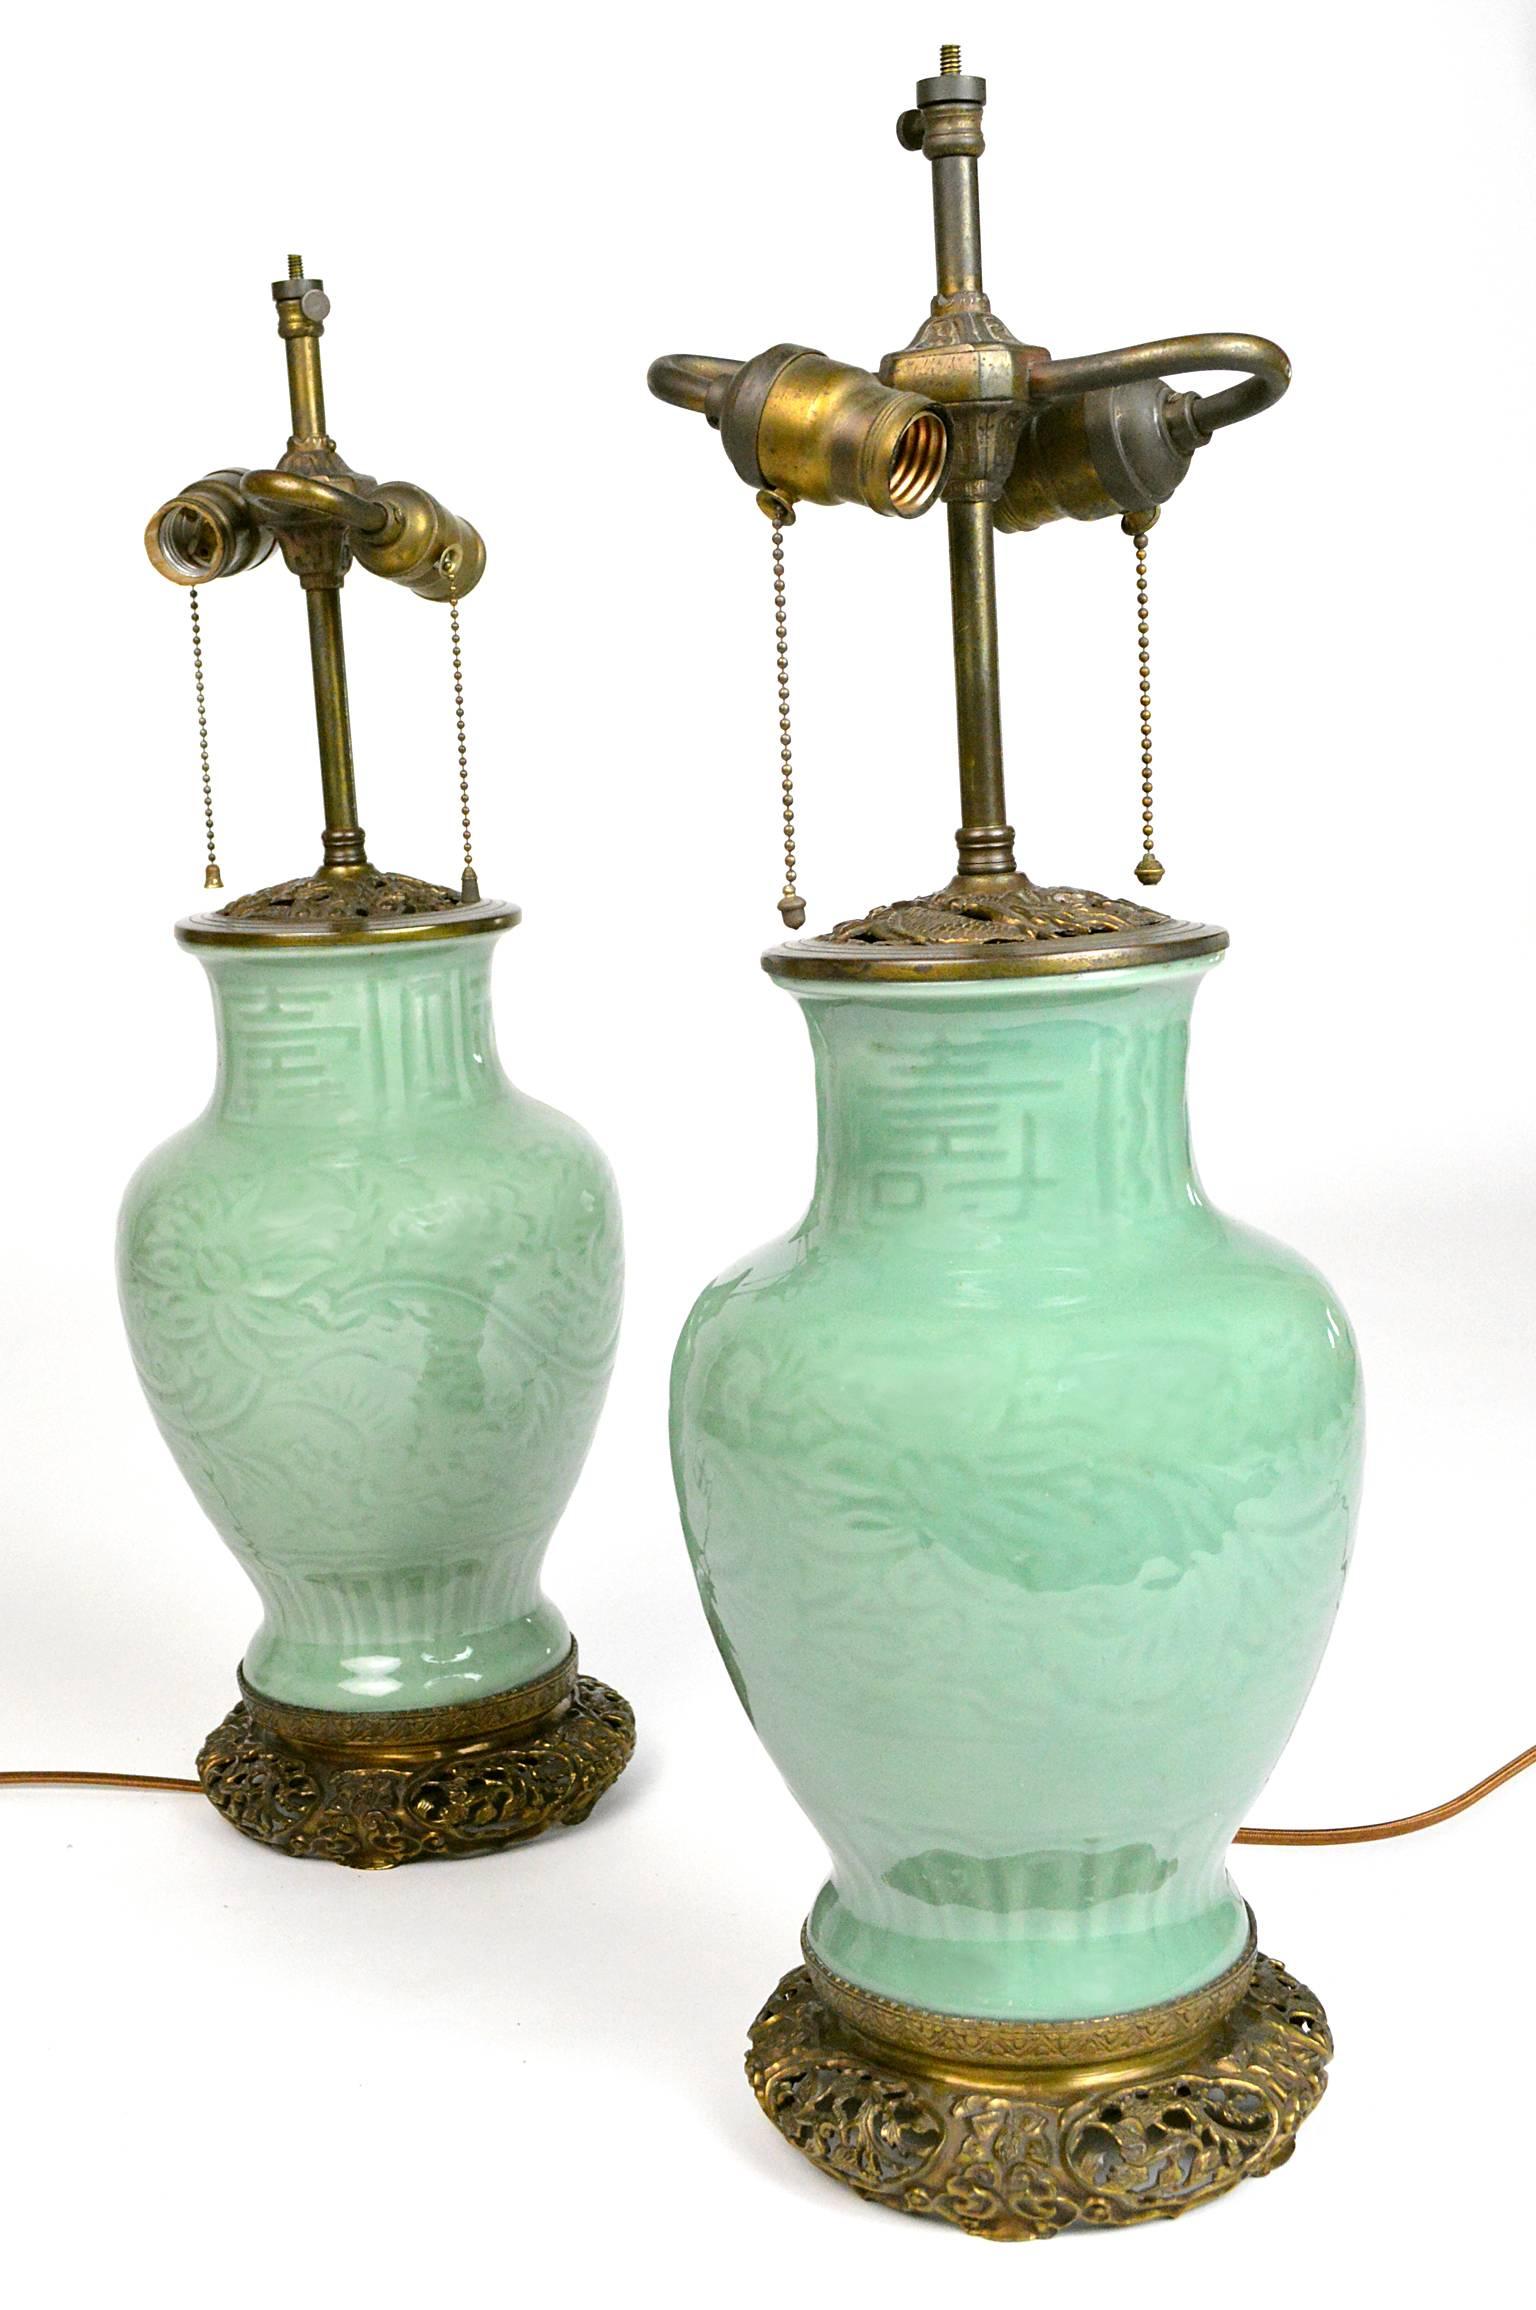 Pair of Chinese celadon porcelain lamps, each with original gilt bronze bases and fittings. Newly rewired. Absolutely gorgeous color. 20